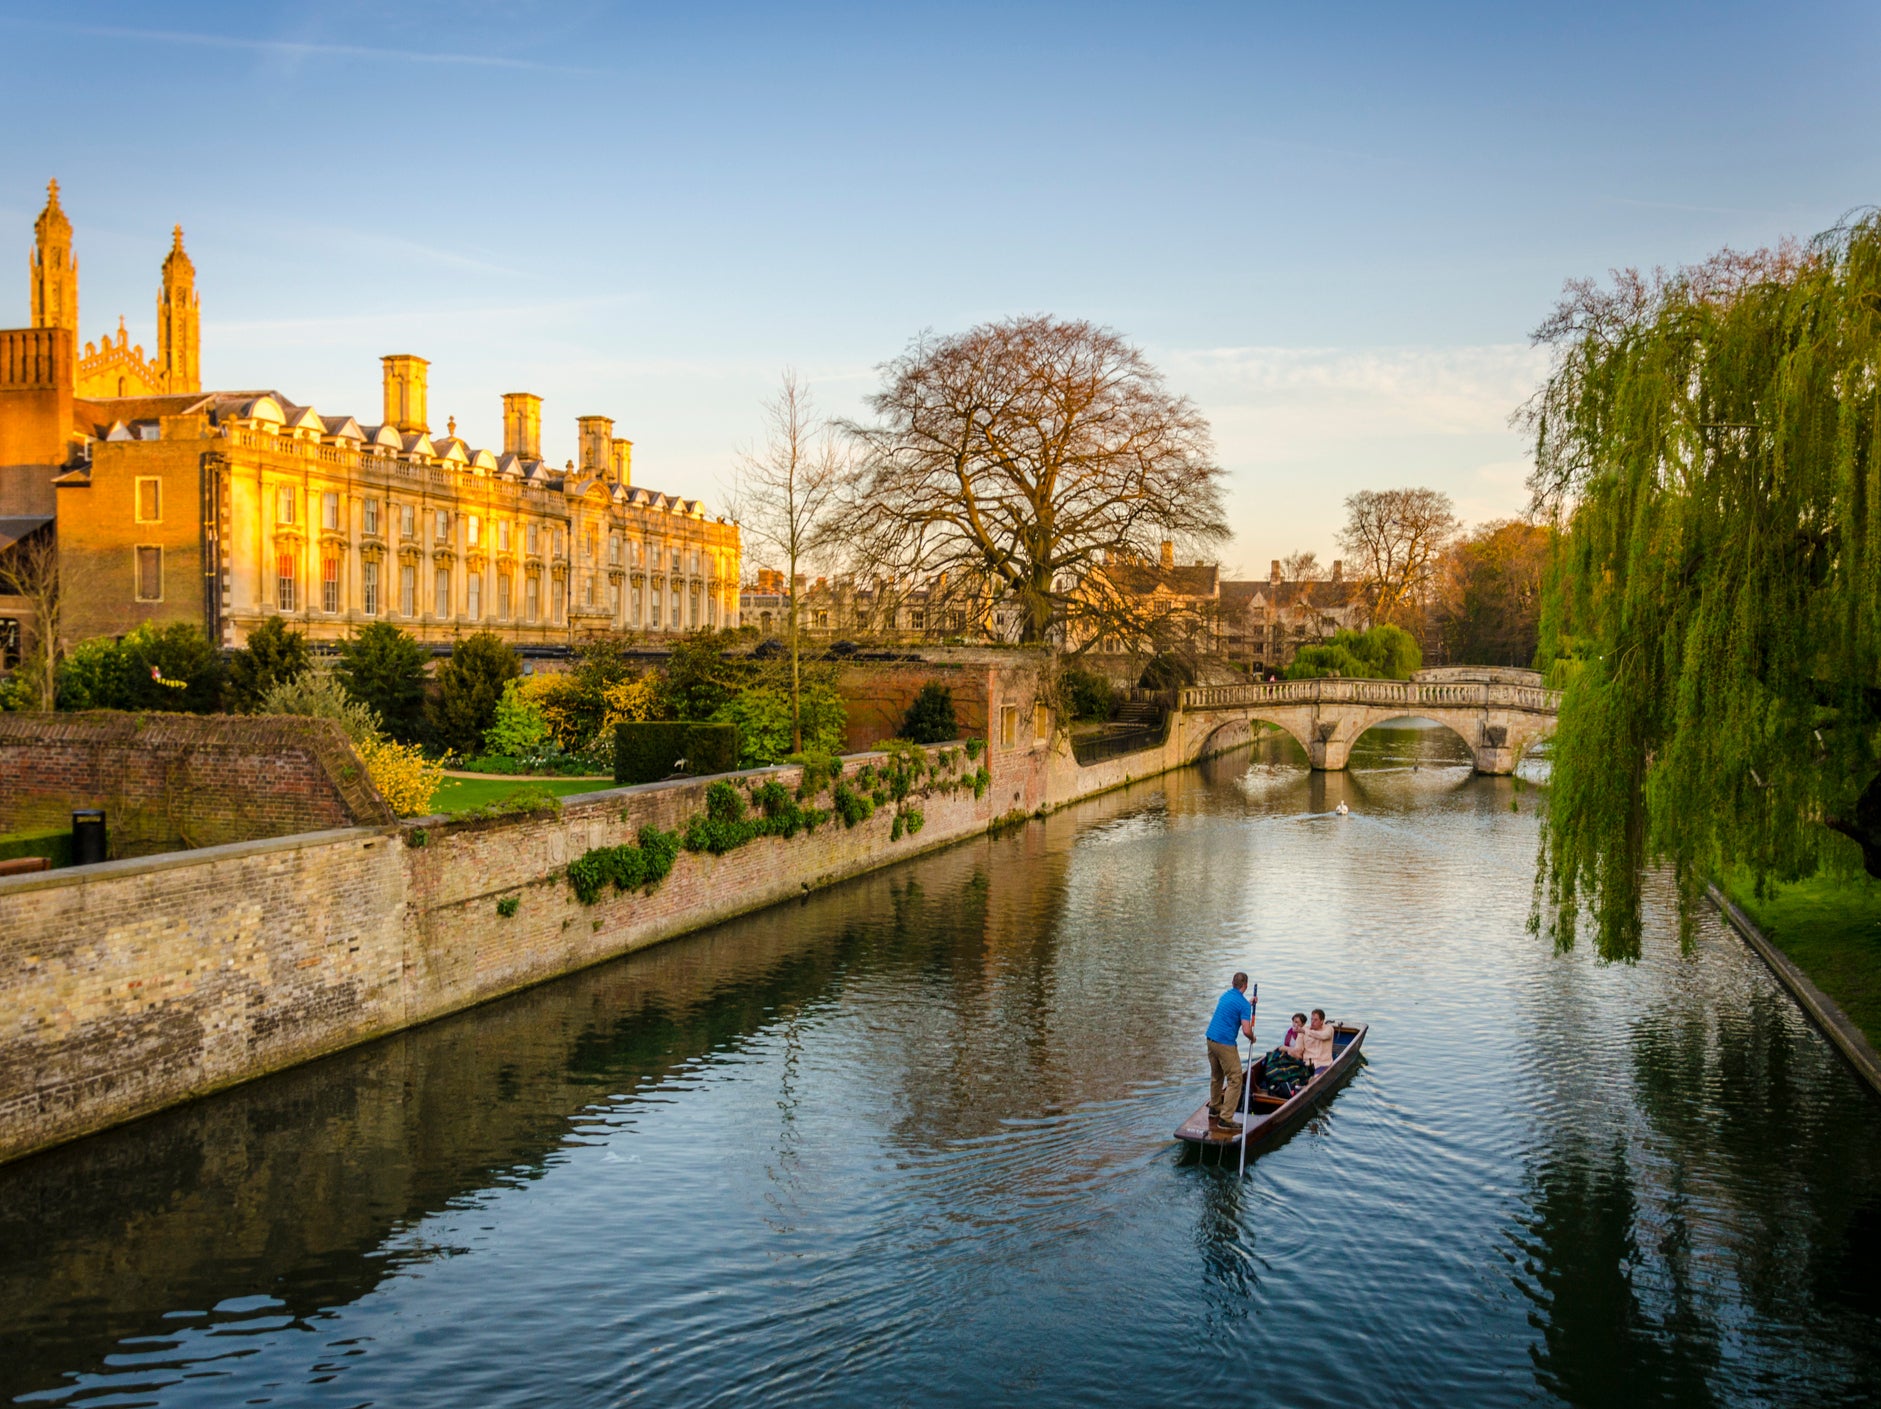 Punting on the River Cam – a quintessential Cambridge experience